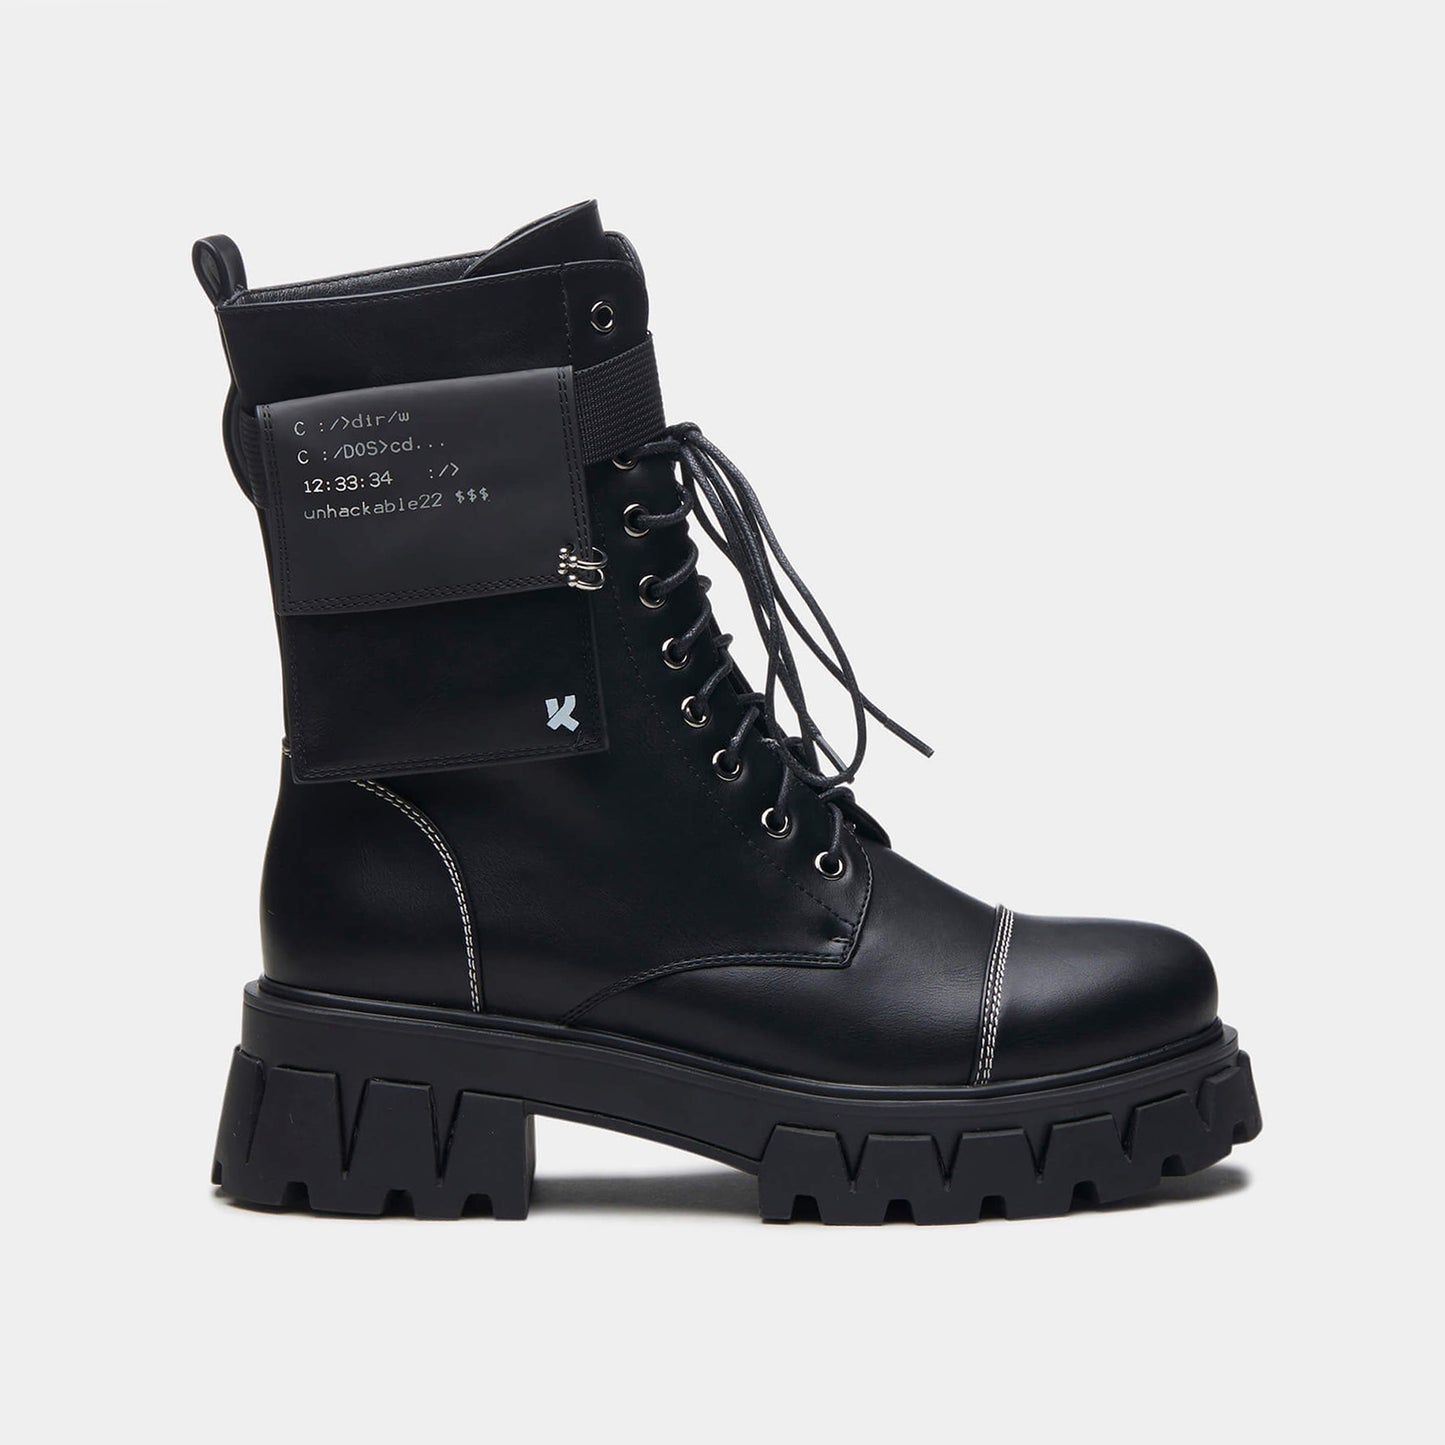 Banshee Fallout Cyber Boots - Ankle Boots - KOI Footwear - Black - Side View